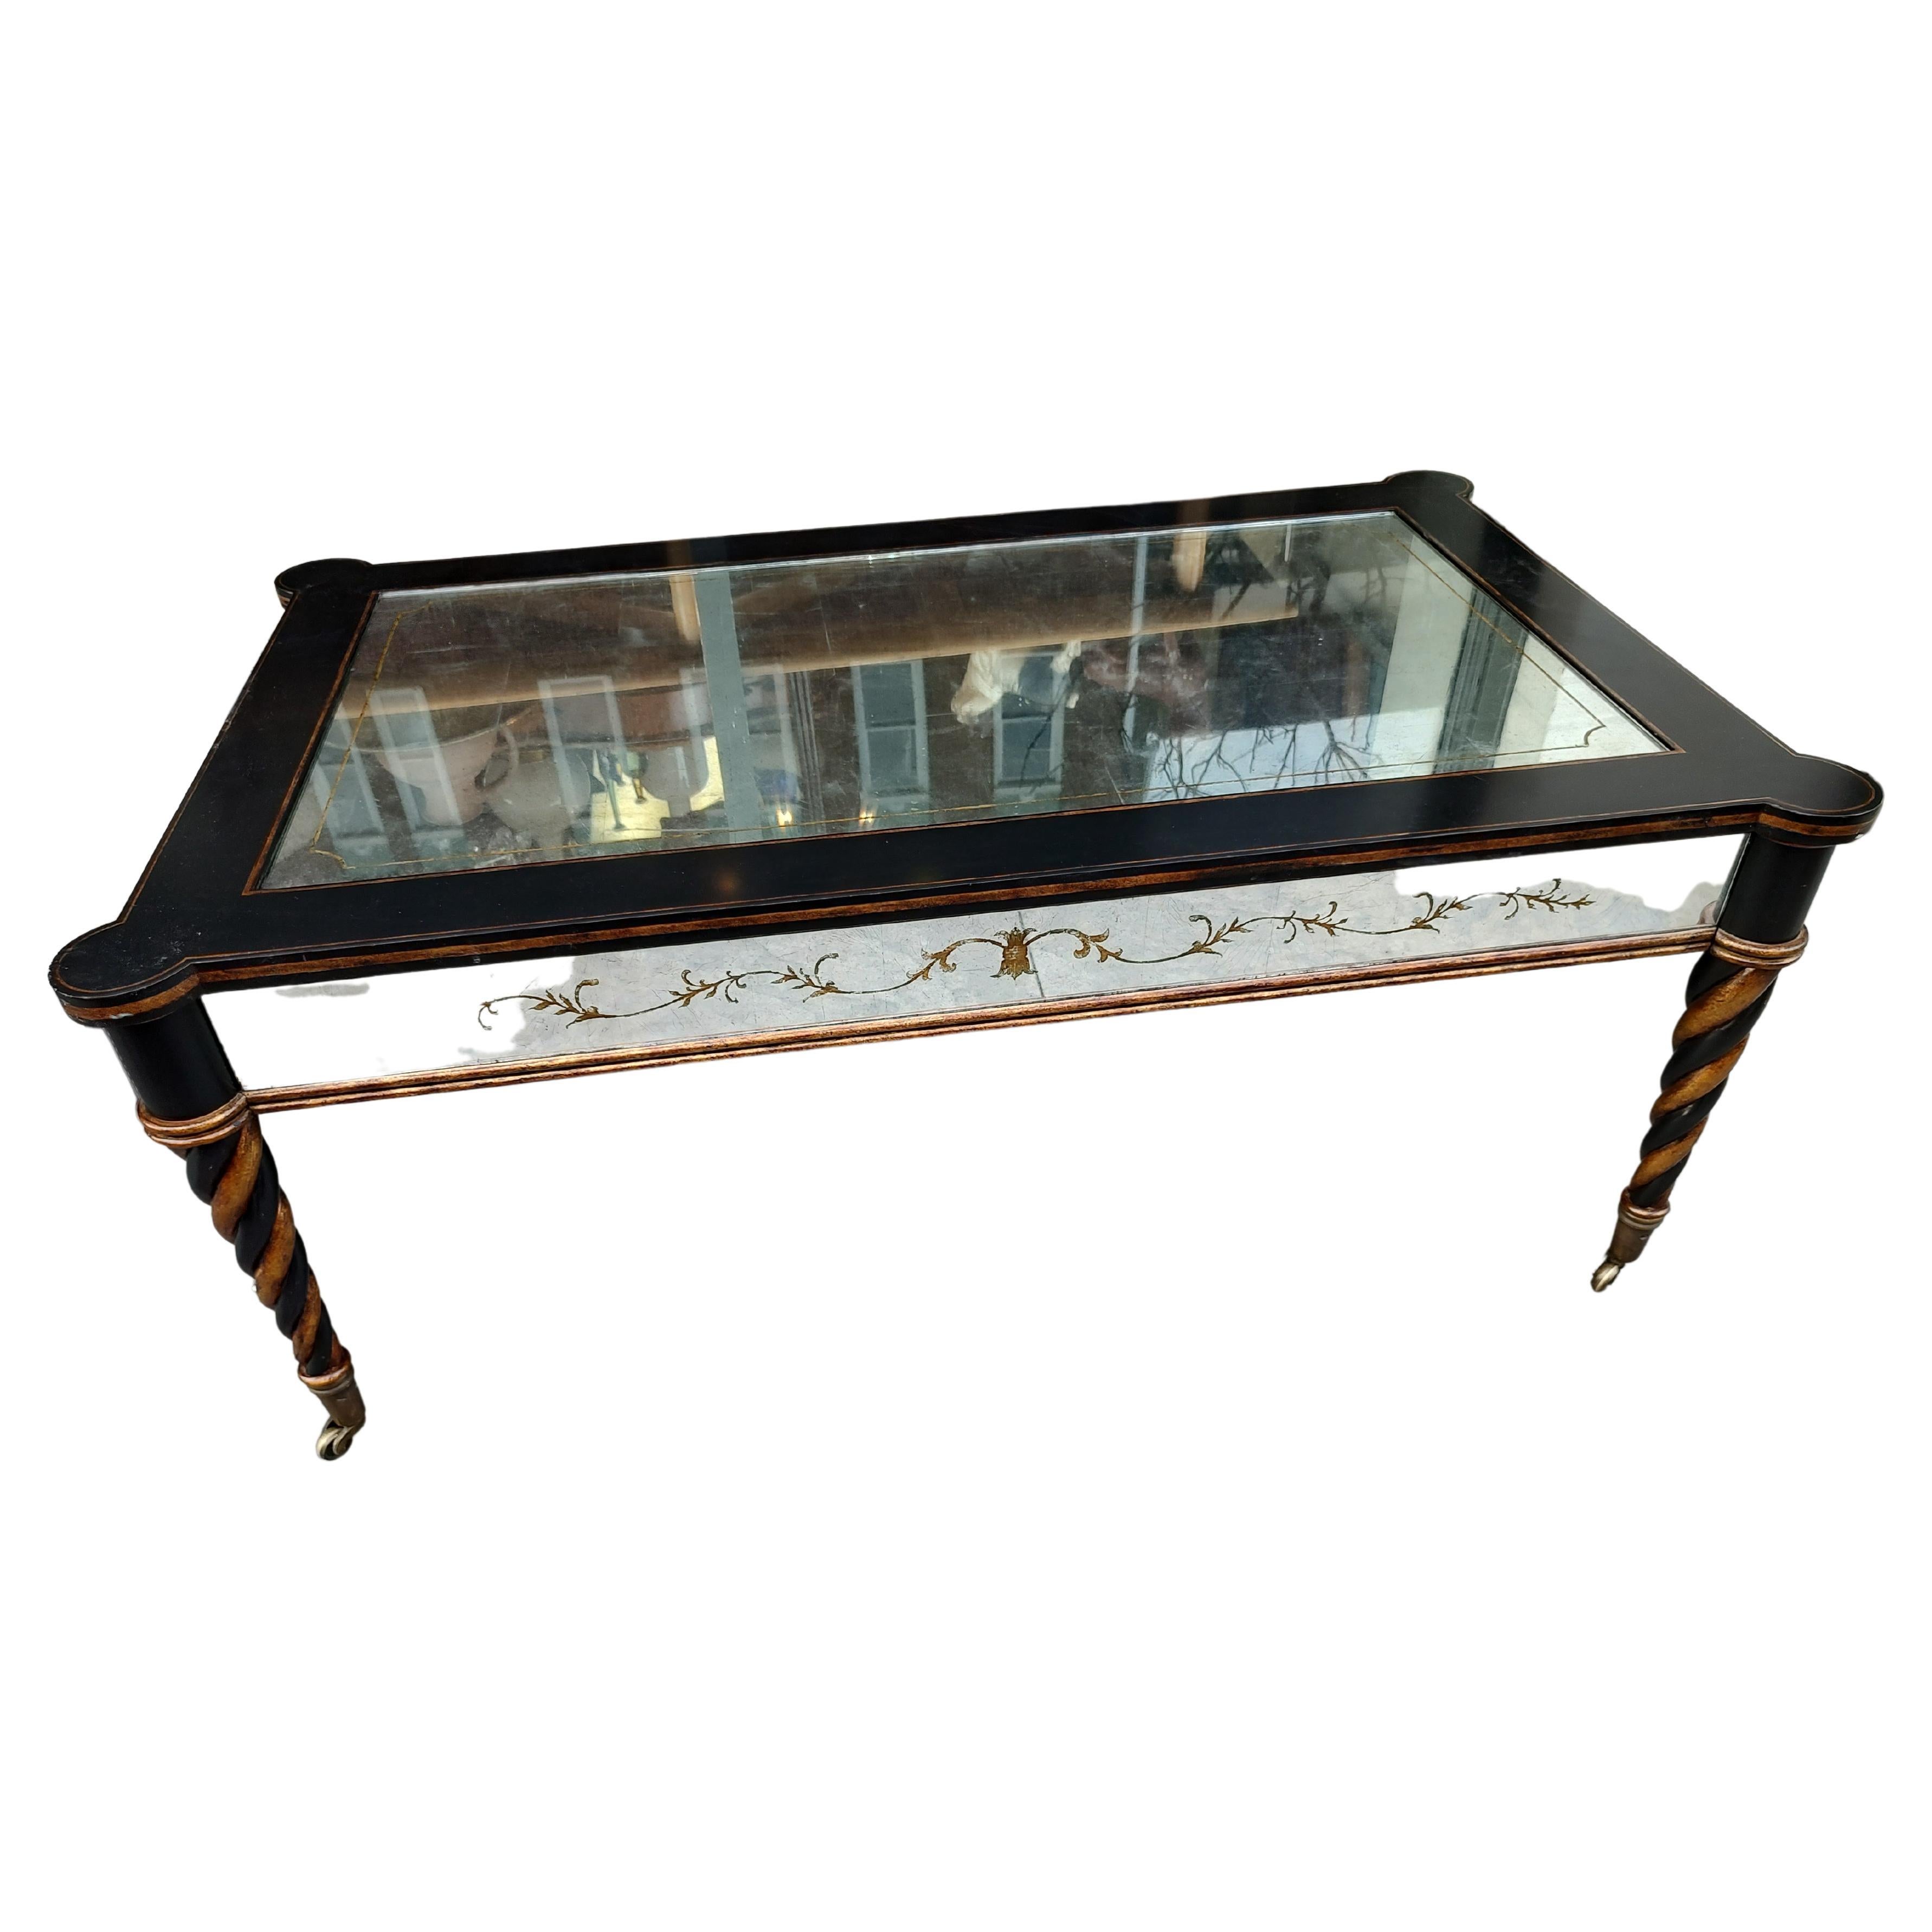 Neoclassical Sheraton Style Cocktail Table with Eglomise Mirrored Panels For Sale 1